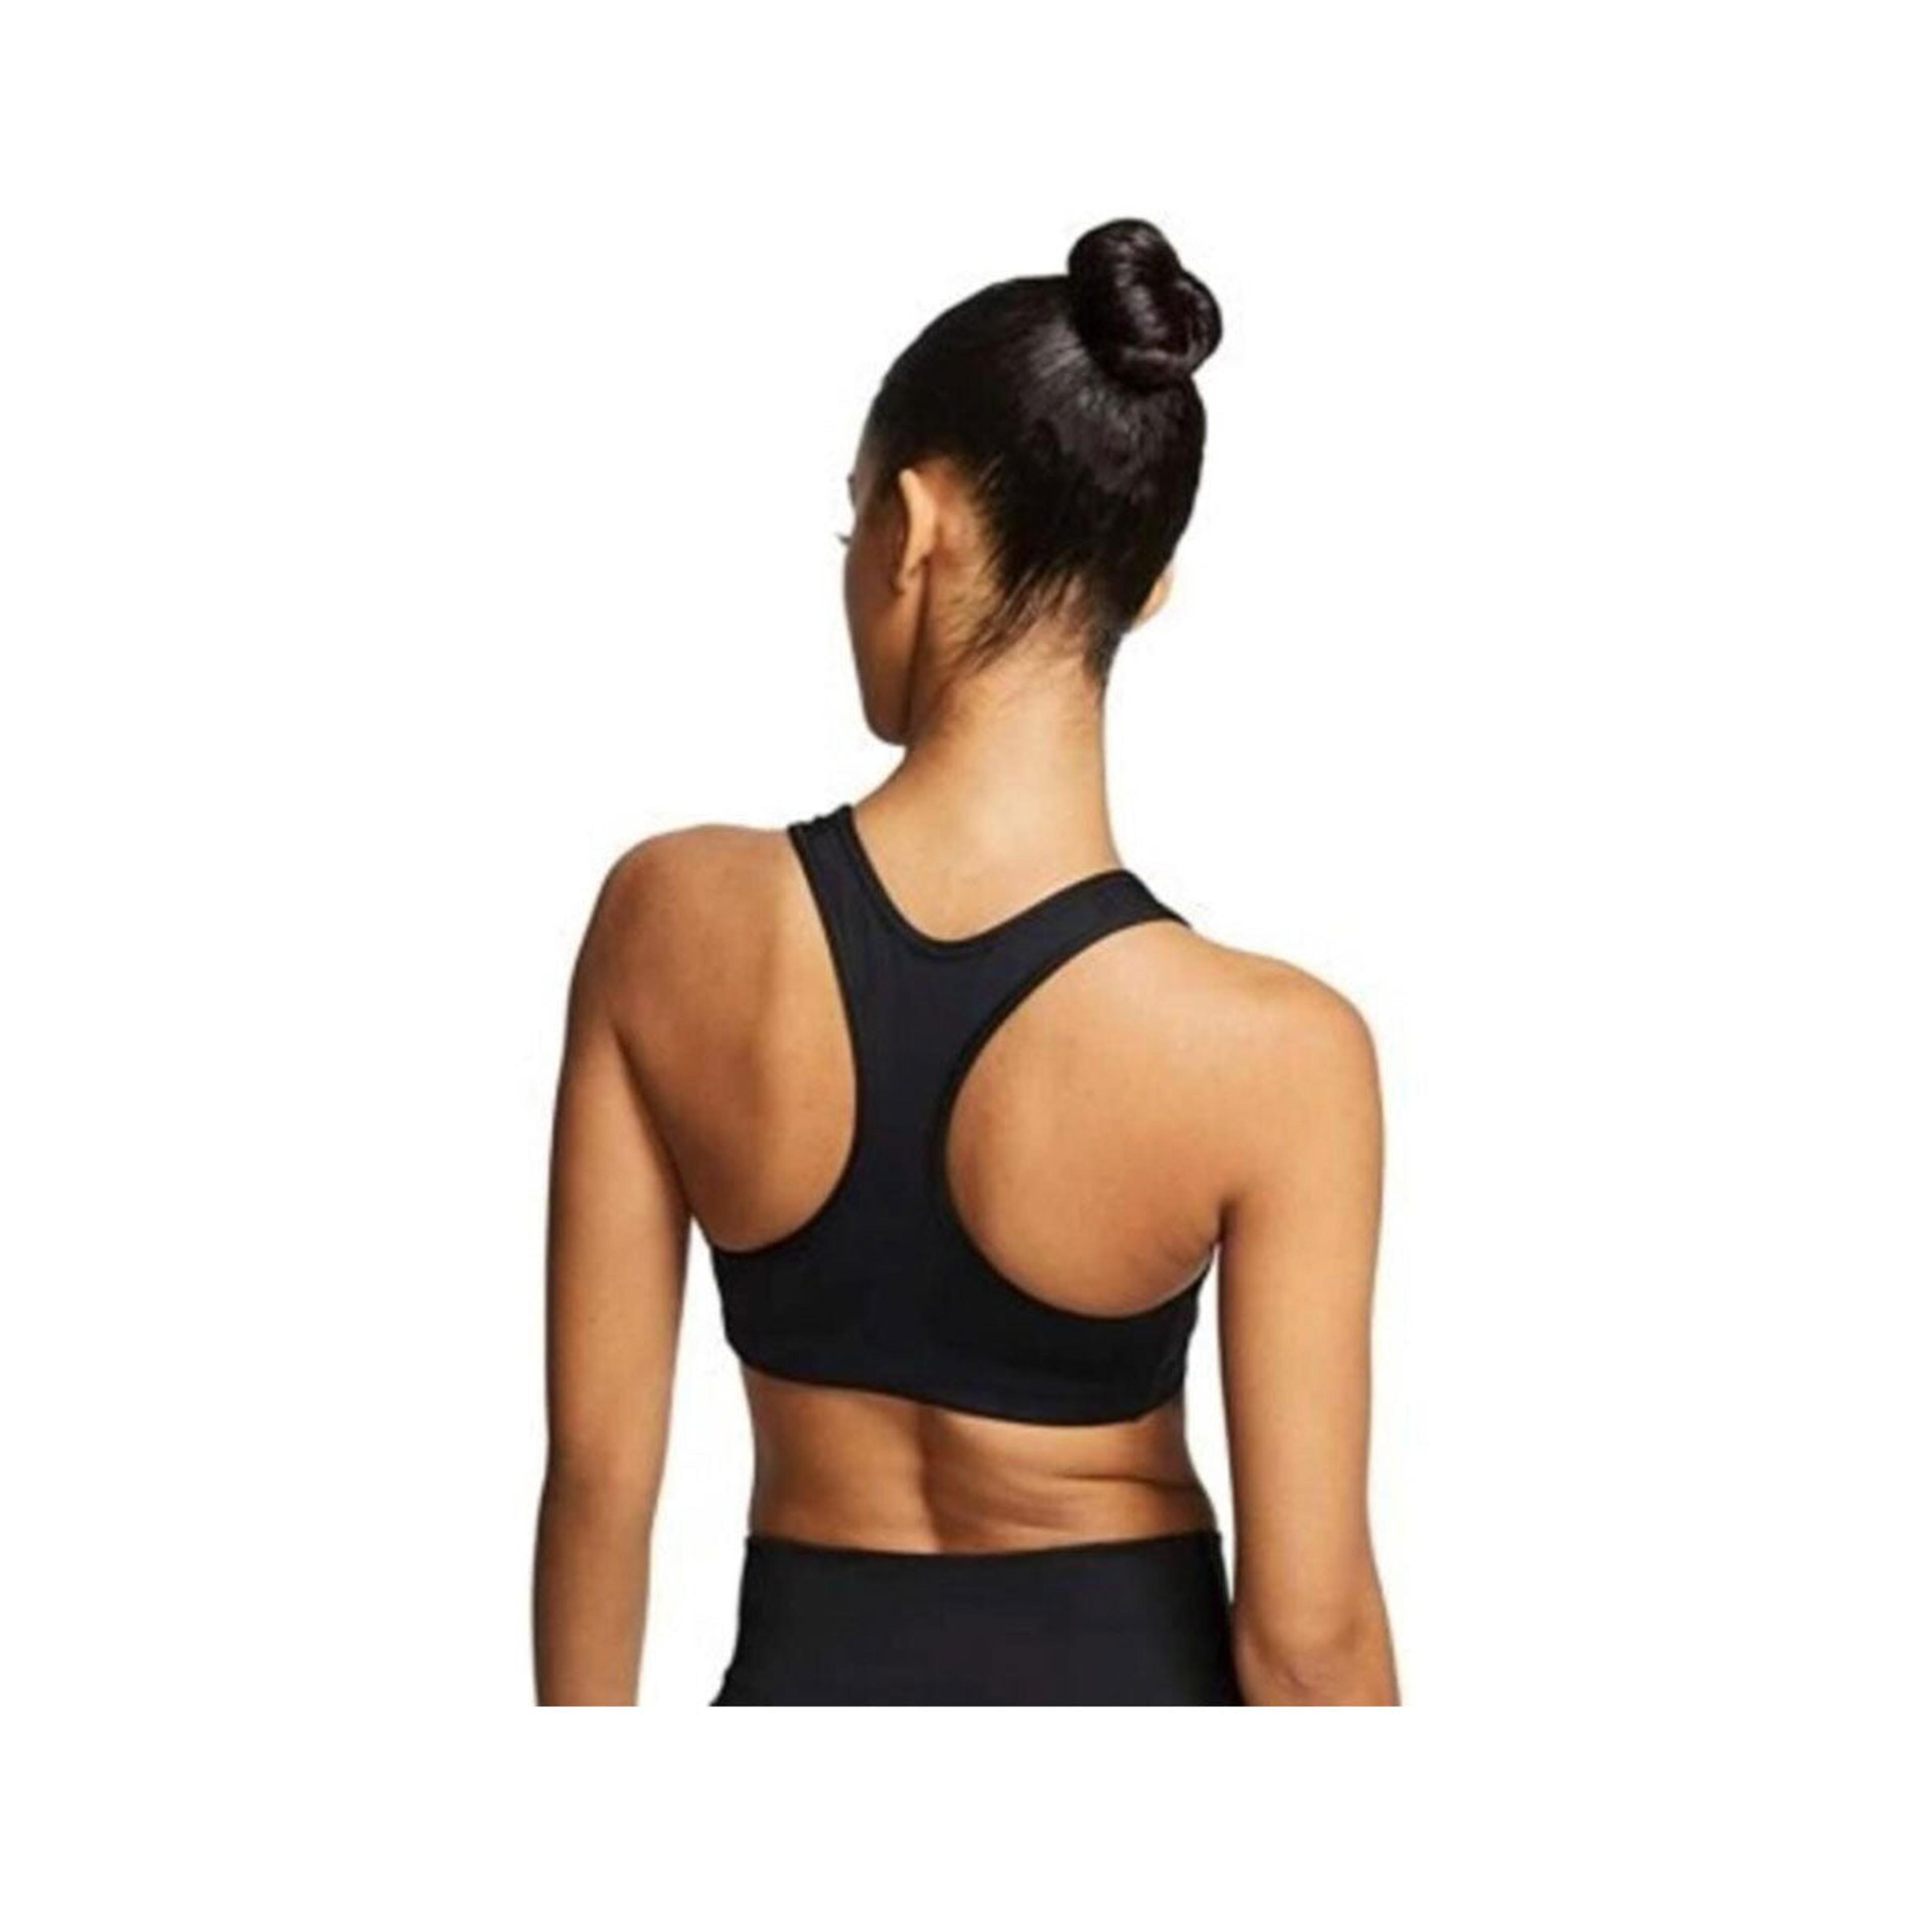  Nike Women's Medium Support Non Padded Sports Bra with